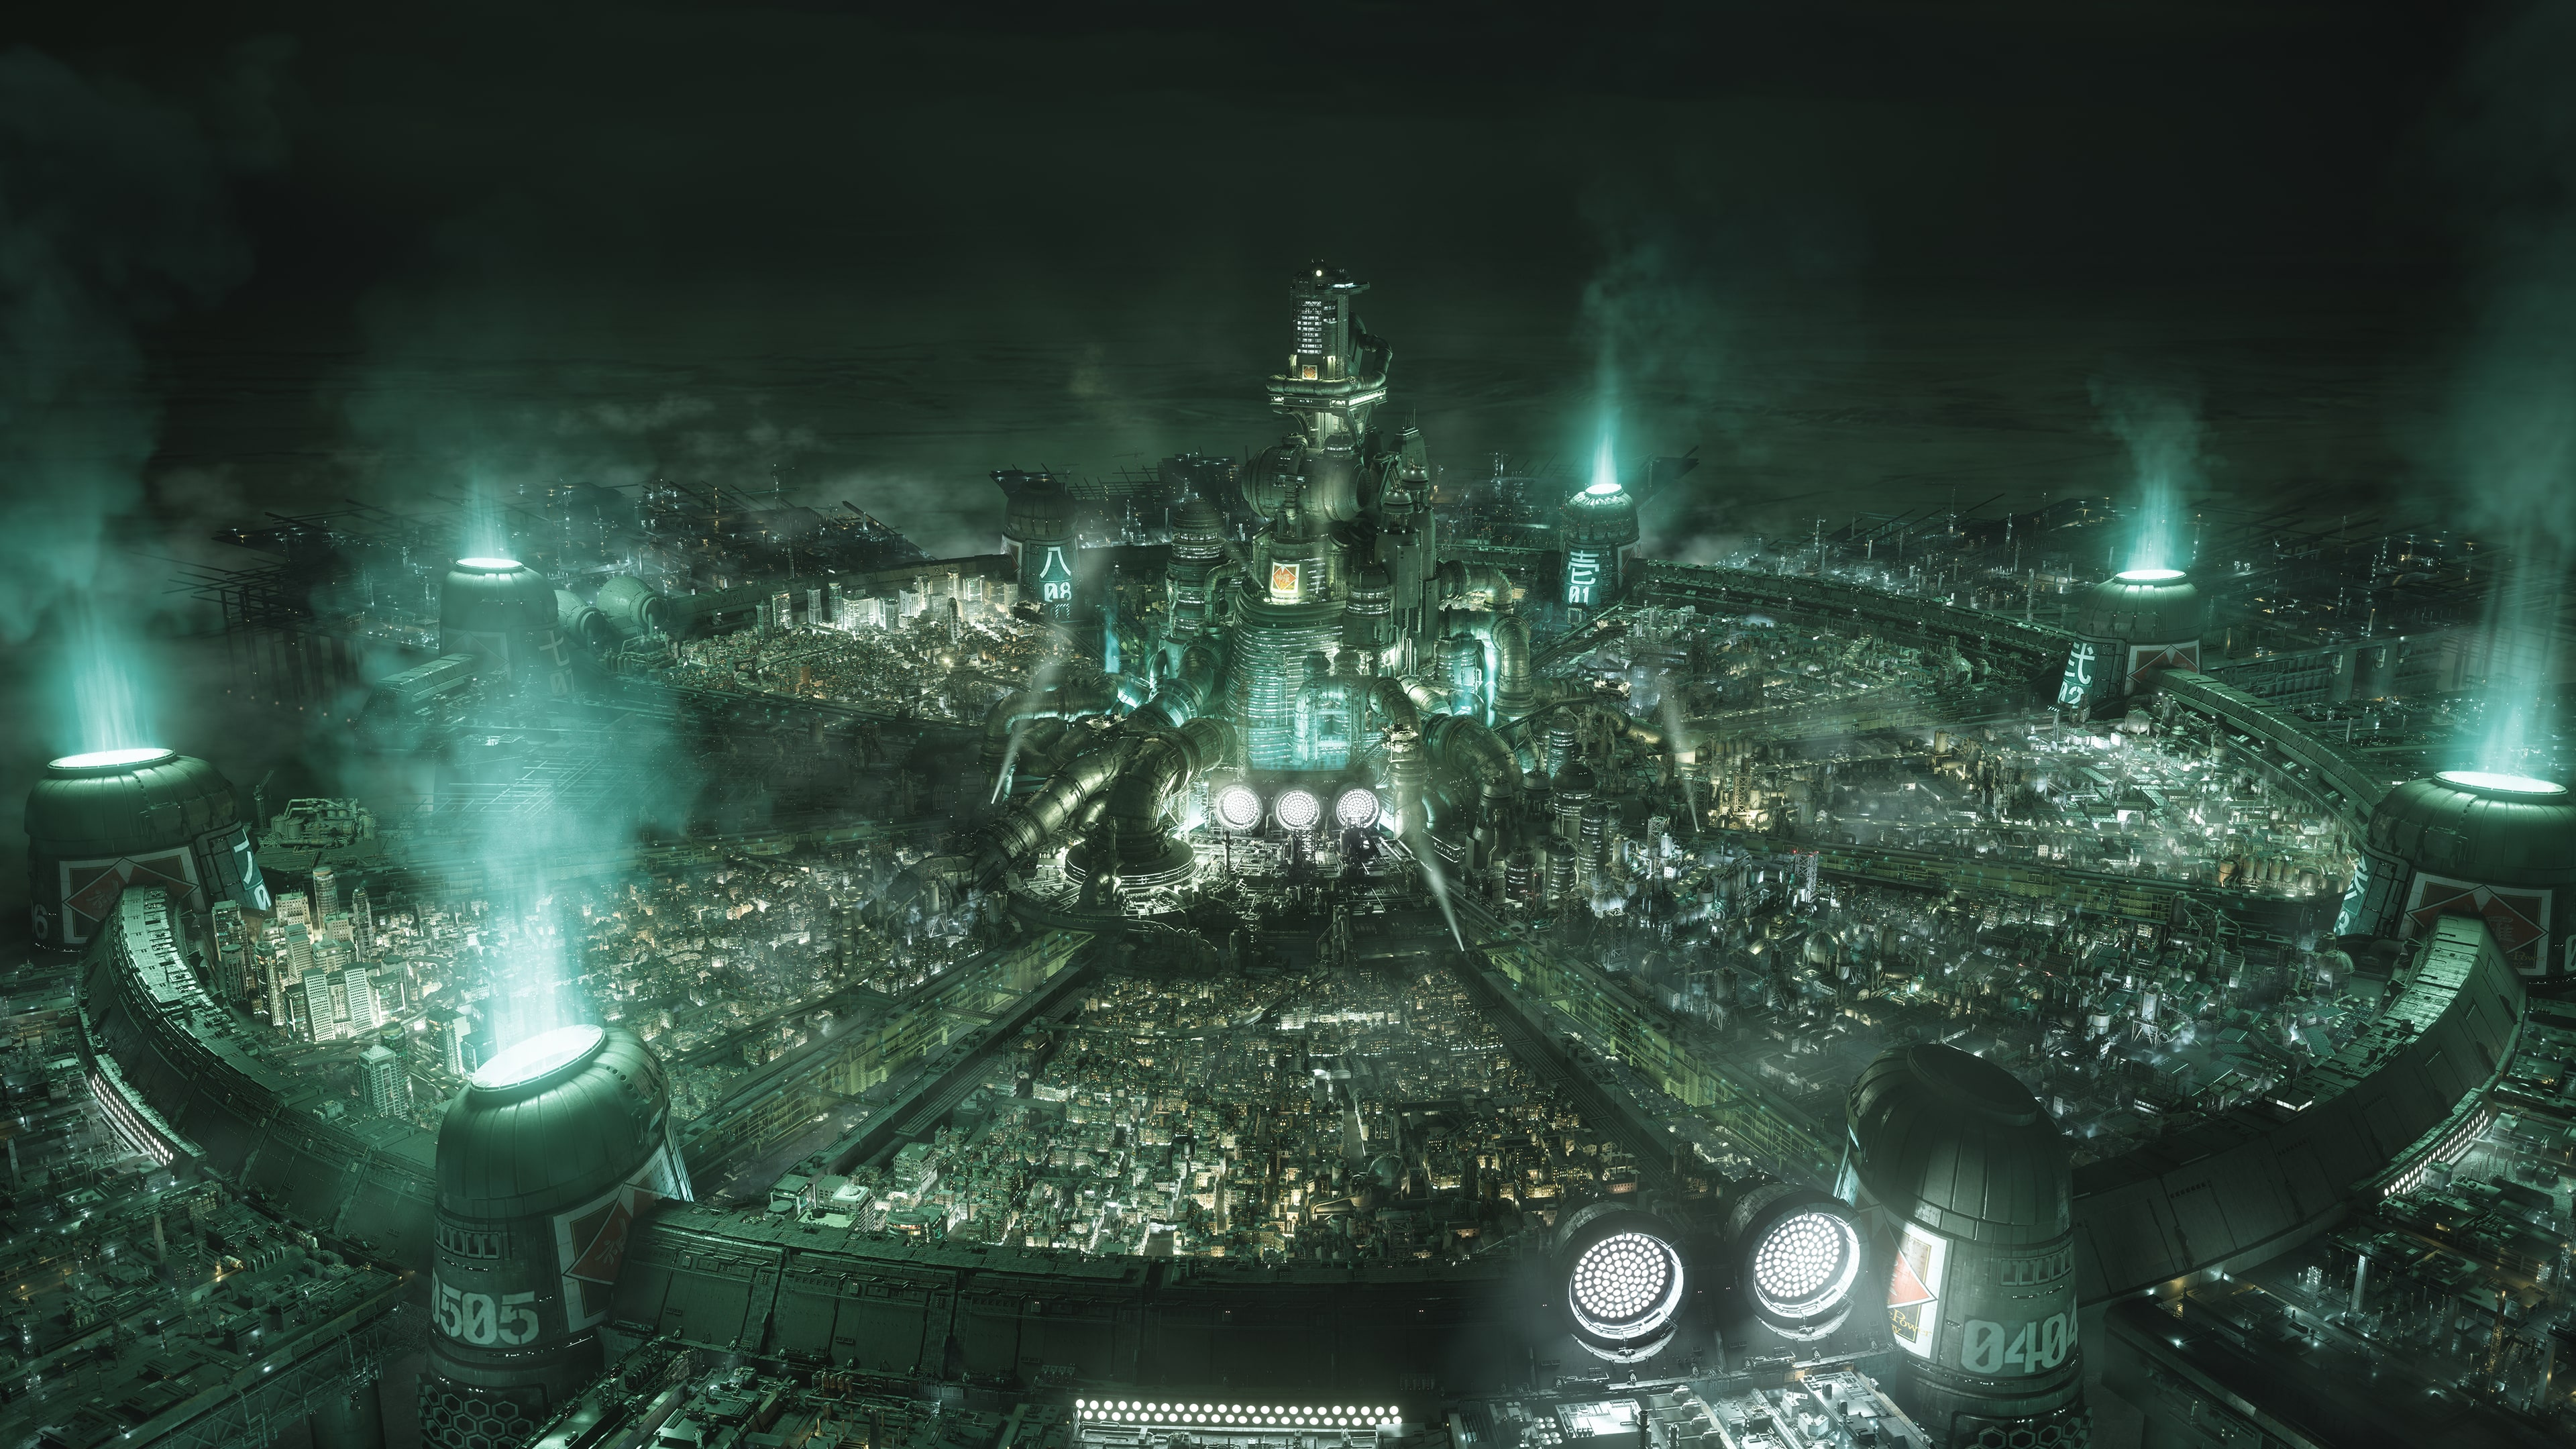 FINAL FANTASY VII REMAKE upgrade for PS4™ version owners(Japanese/English Version) (English, Japanese)